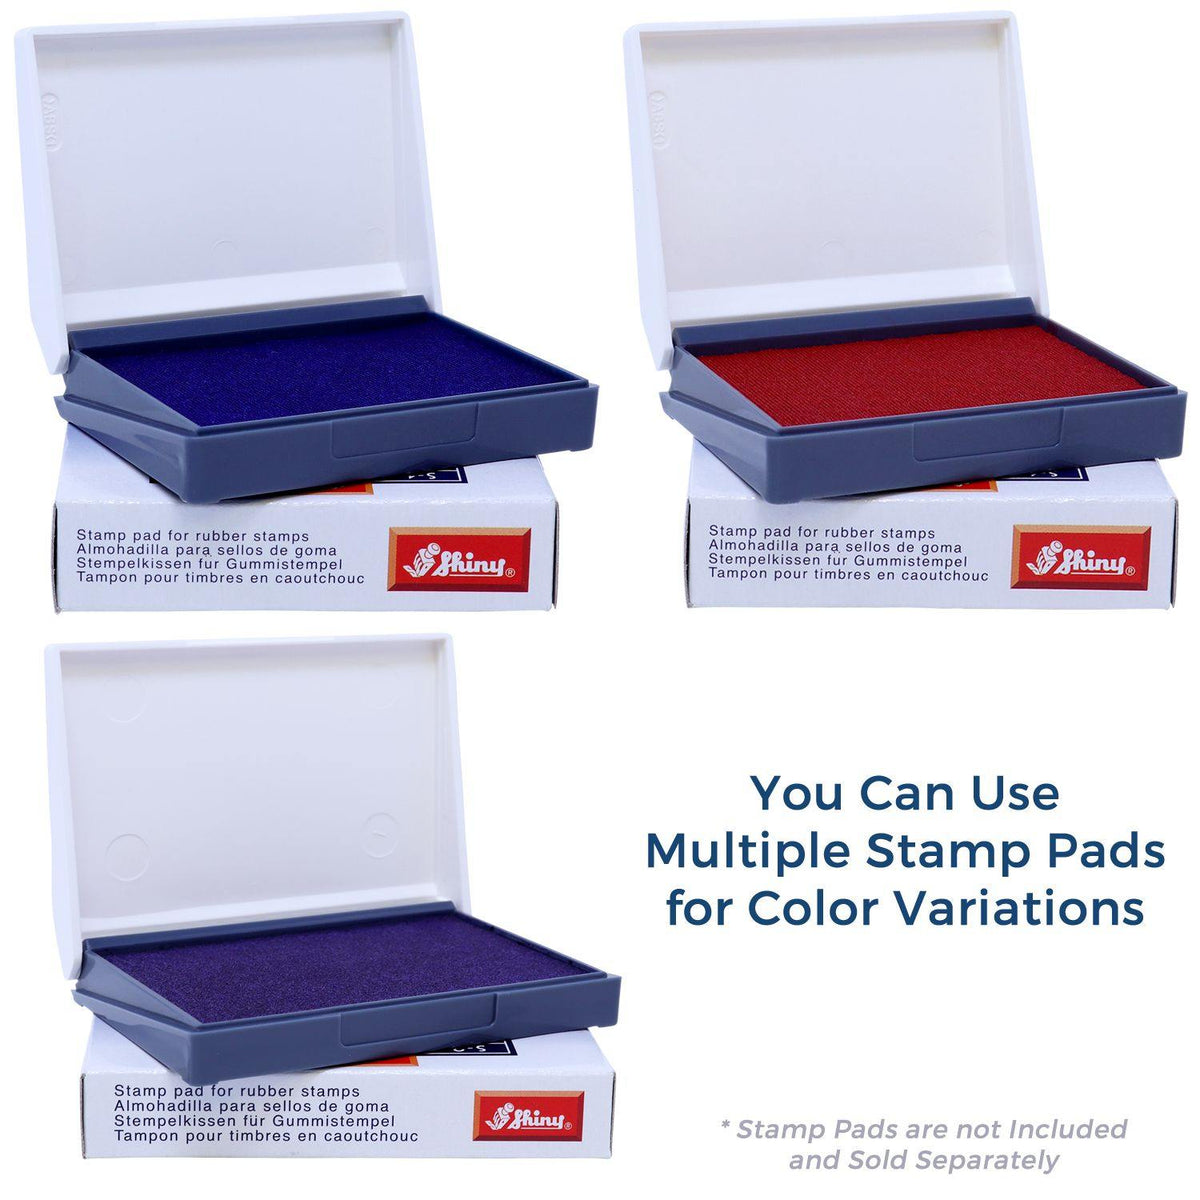 Stamp Pads for Express Mail International Rubber Stamp Available